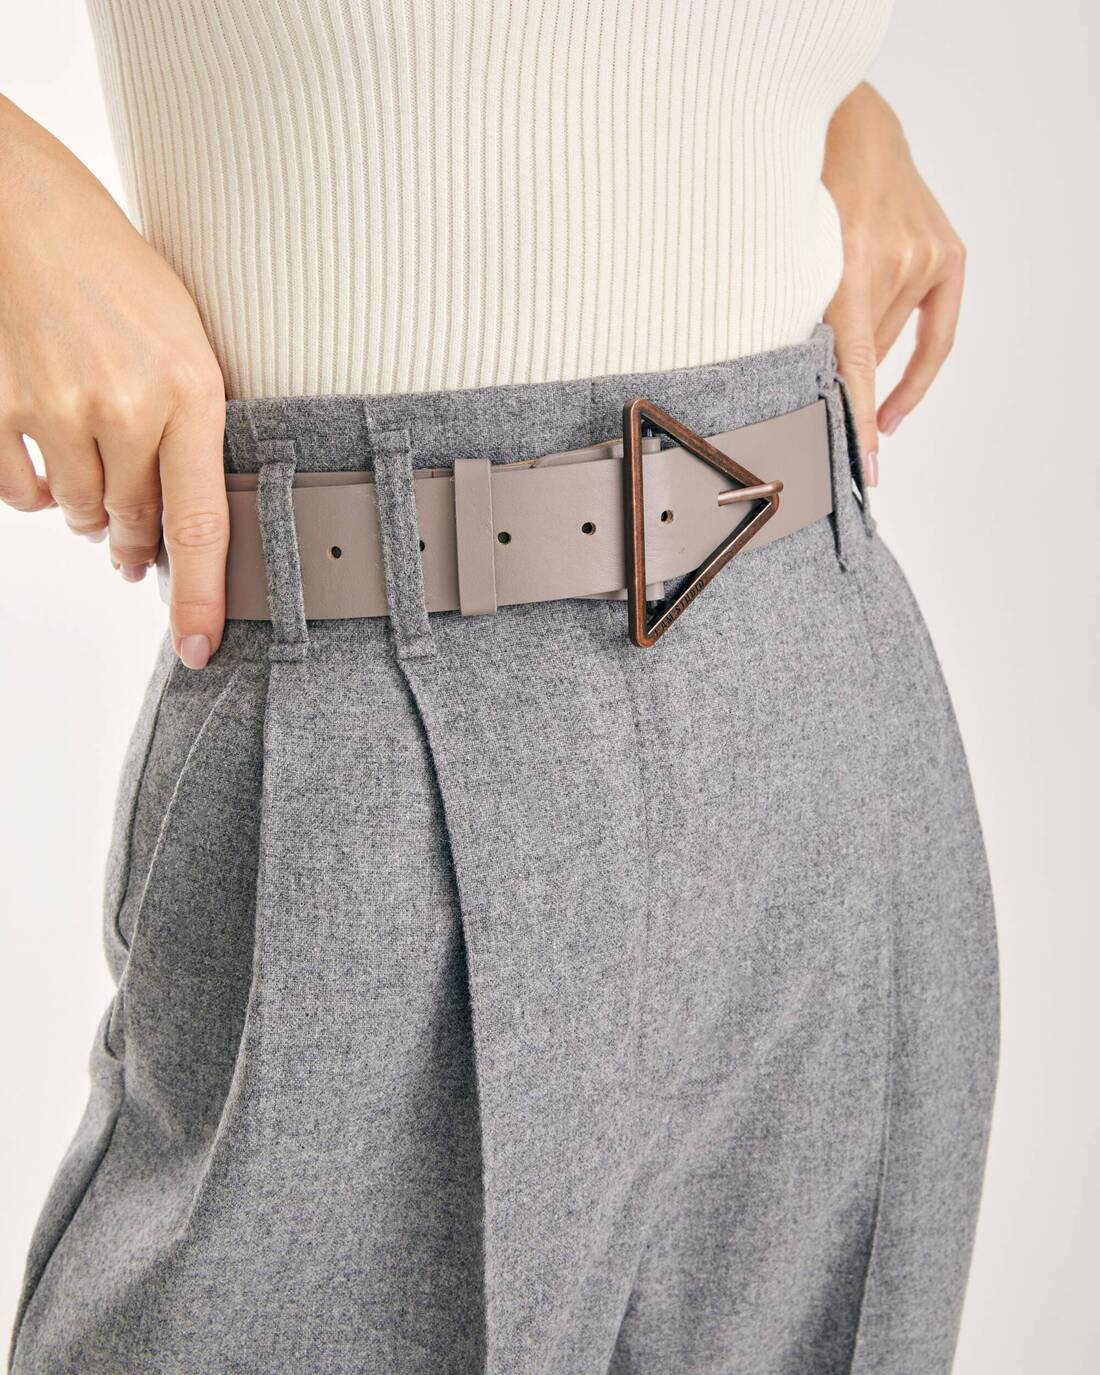 Classic leather belt with triangular buckle 